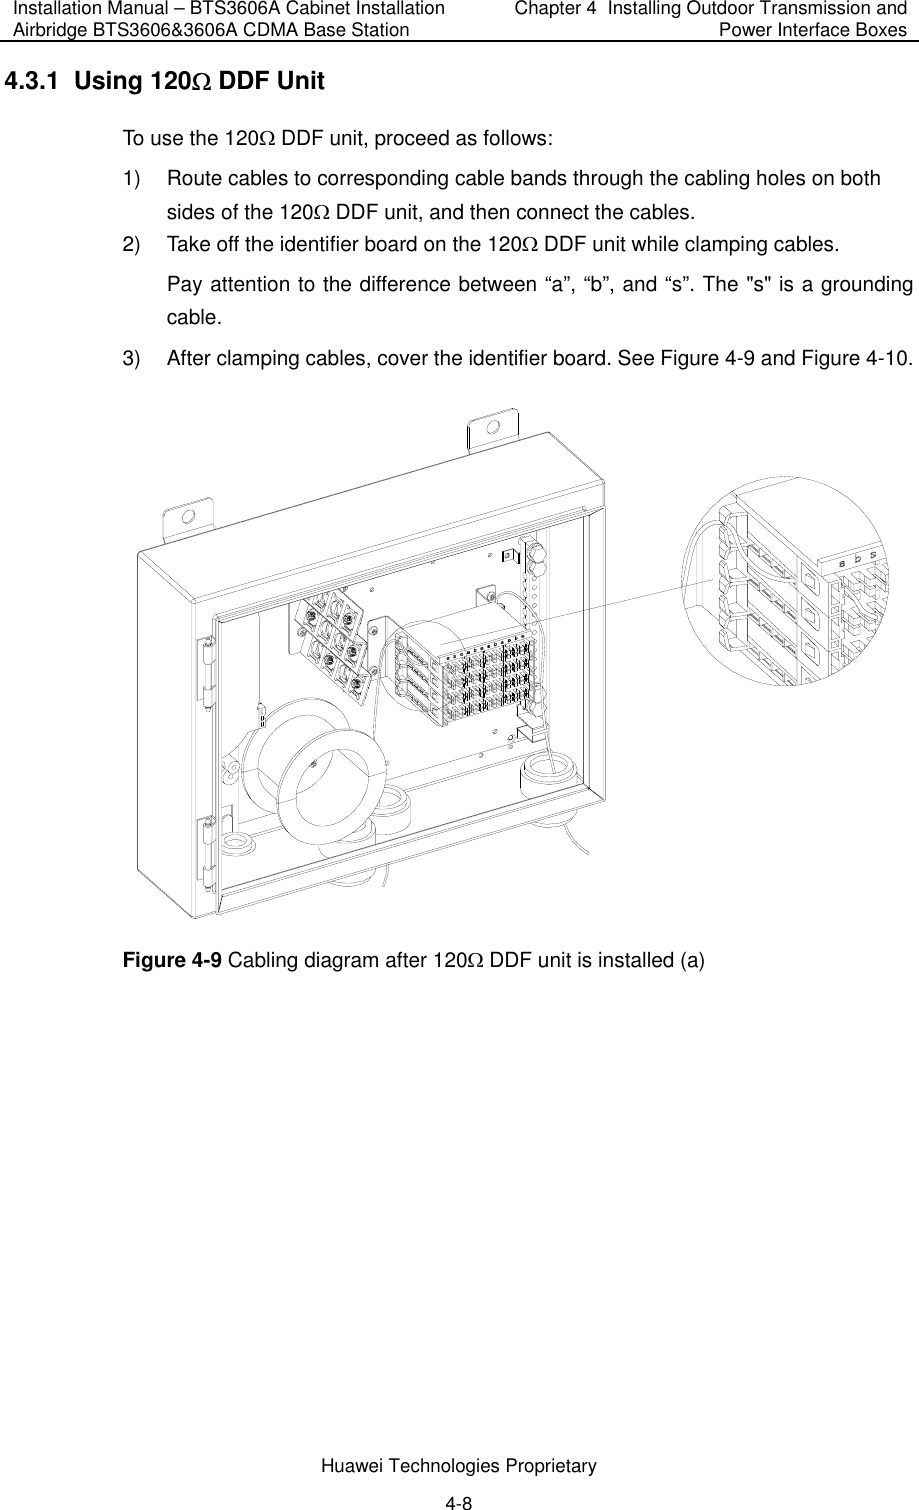 Installation Manual – BTS3606A Cabinet Installation Airbridge BTS3606&amp;3606A CDMA Base Station  Chapter 4  Installing Outdoor Transmission and Power Interface Boxes  Huawei Technologies Proprietary 4-8 4.3.1  Using 120Ω DDF Unit To use the 120Ω DDF unit, proceed as follows:  1)  Route cables to corresponding cable bands through the cabling holes on both sides of the 120Ω DDF unit, and then connect the cables. 2)  Take off the identifier board on the 120Ω DDF unit while clamping cables. Pay attention to the difference between “a”, “b”, and “s”. The &quot;s&quot; is a grounding cable. 3)  After clamping cables, cover the identifier board. See Figure 4-9 and Figure 4-10.  Figure 4-9 Cabling diagram after 120Ω DDF unit is installed (a) 